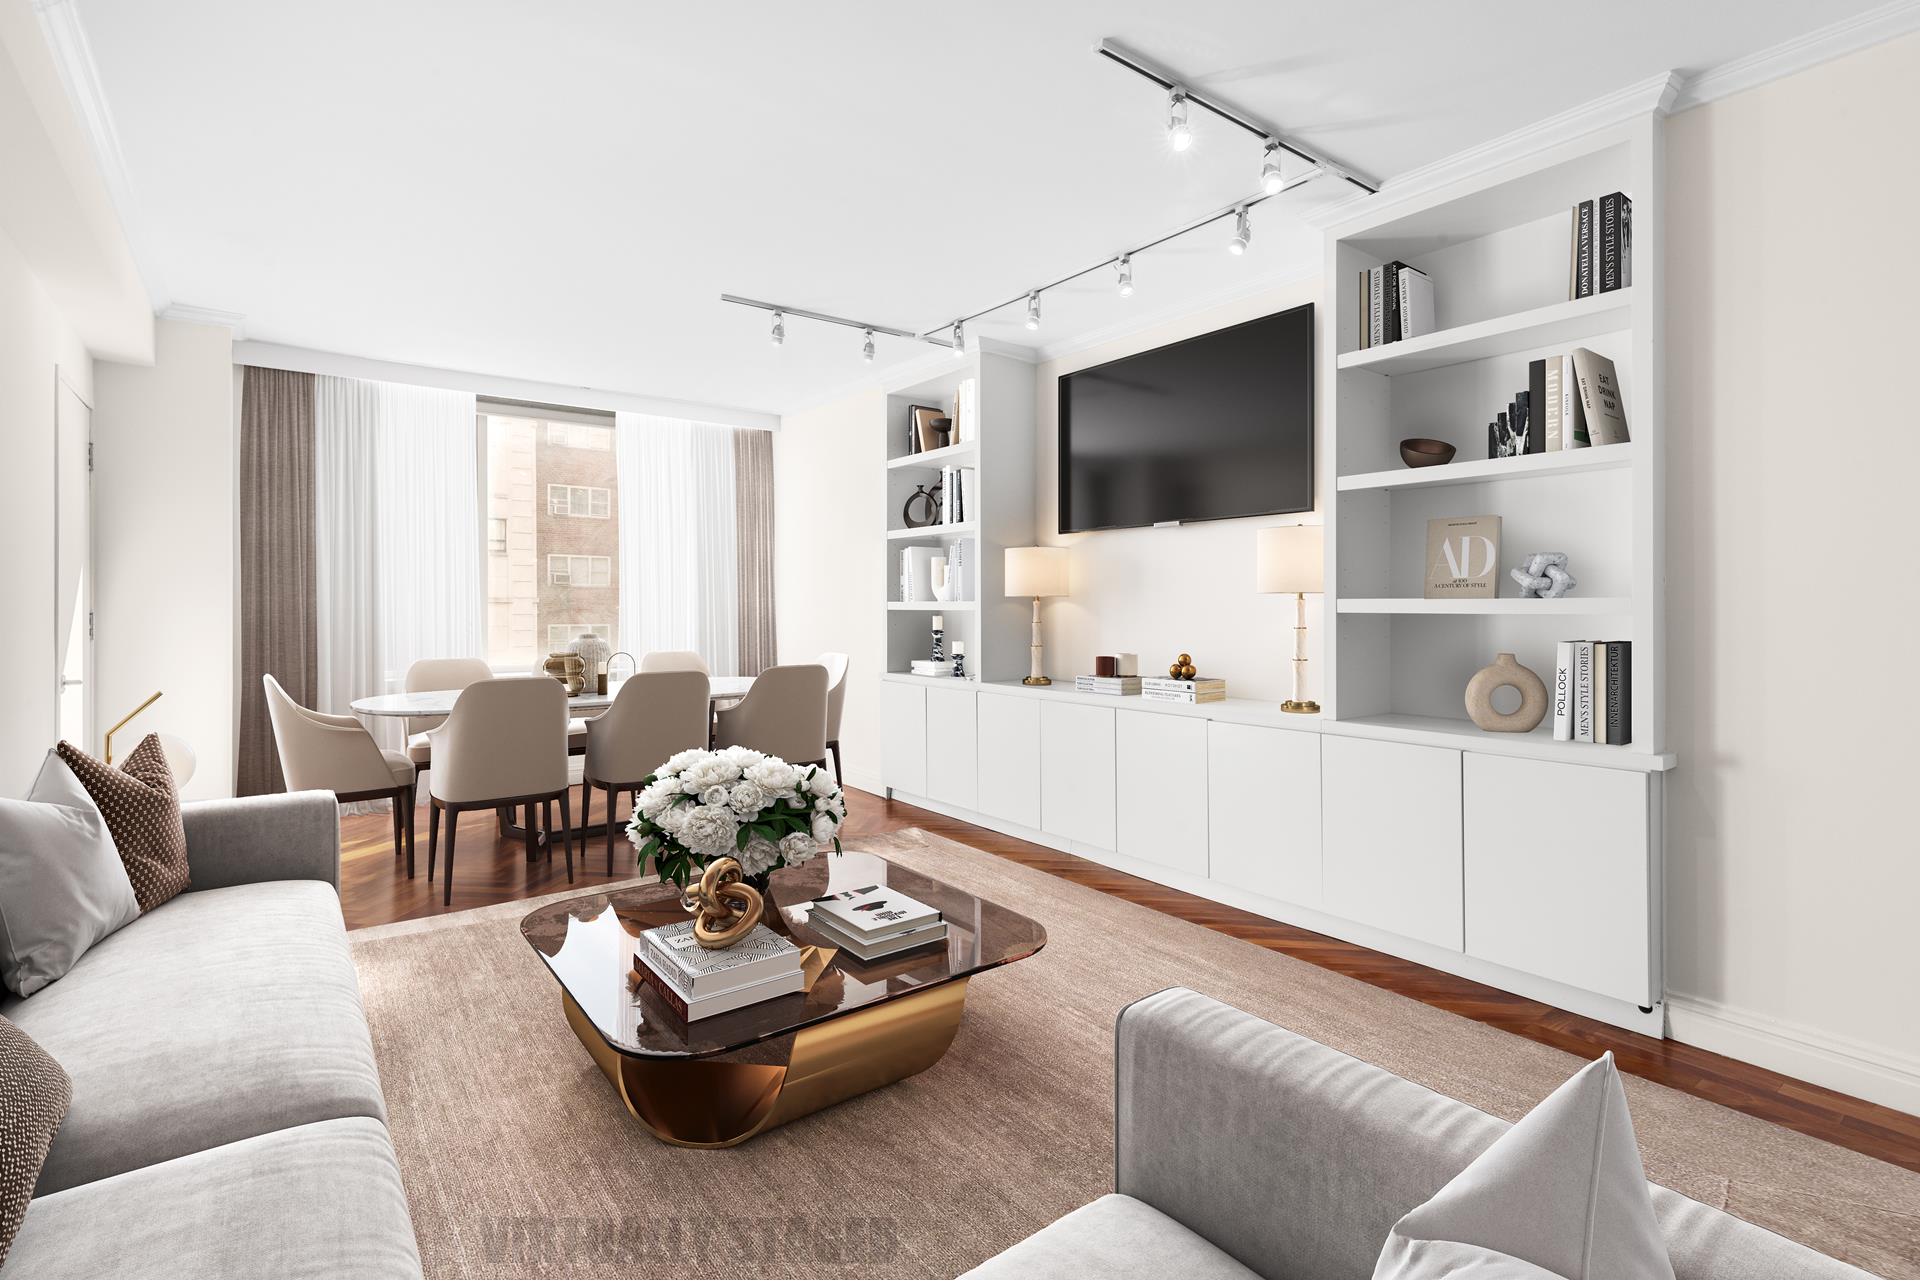 90 East End Avenue 6B, Yorkville, Upper East Side, NYC - 3 Bedrooms  
2.5 Bathrooms  
6 Rooms - 